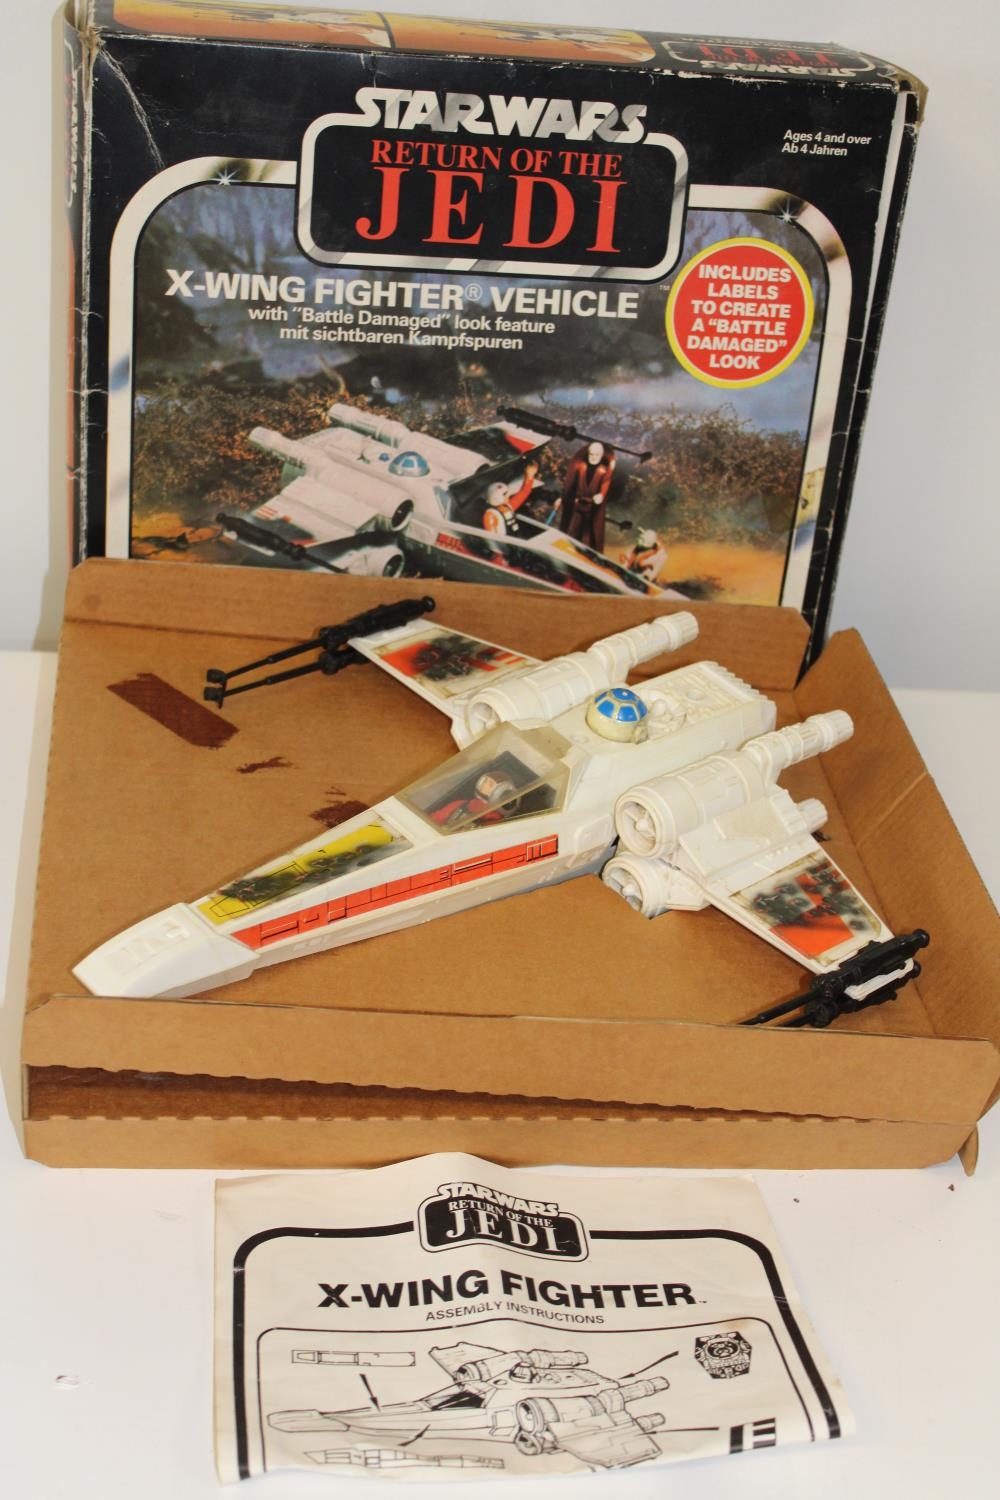 A boxed 1980's Star Wars X-Wing Fighter